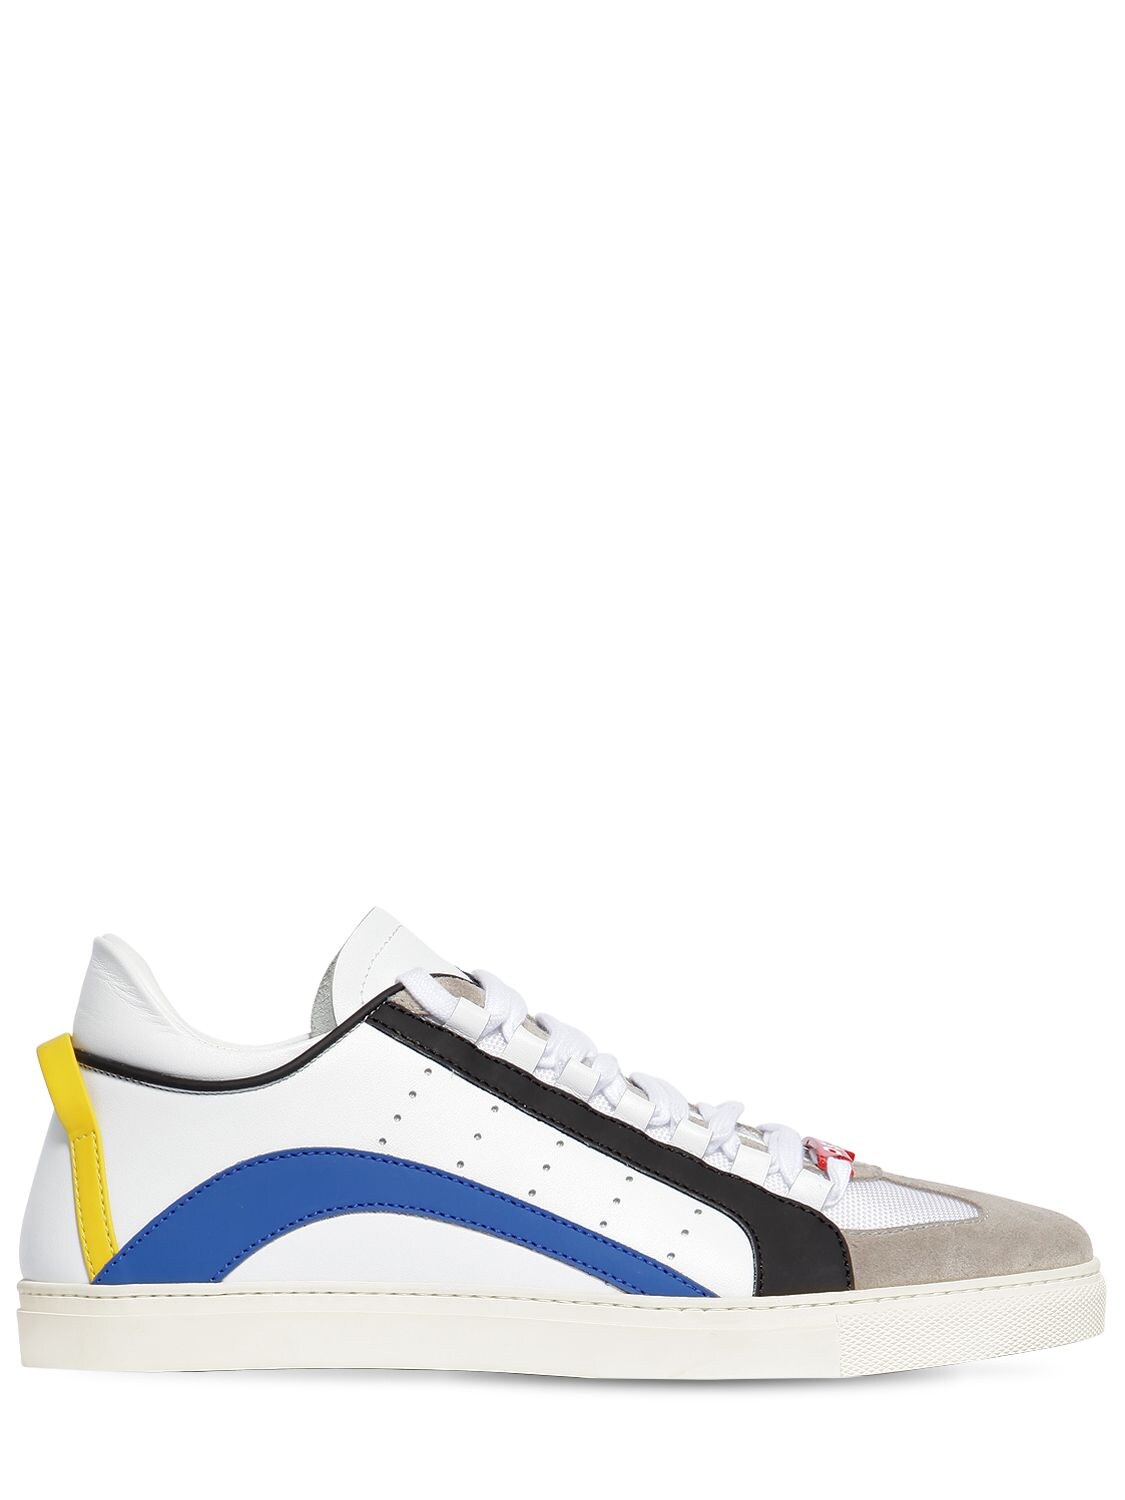 Dsquared2 New 551 Leather Rubber Suede Sneakers In White,blue